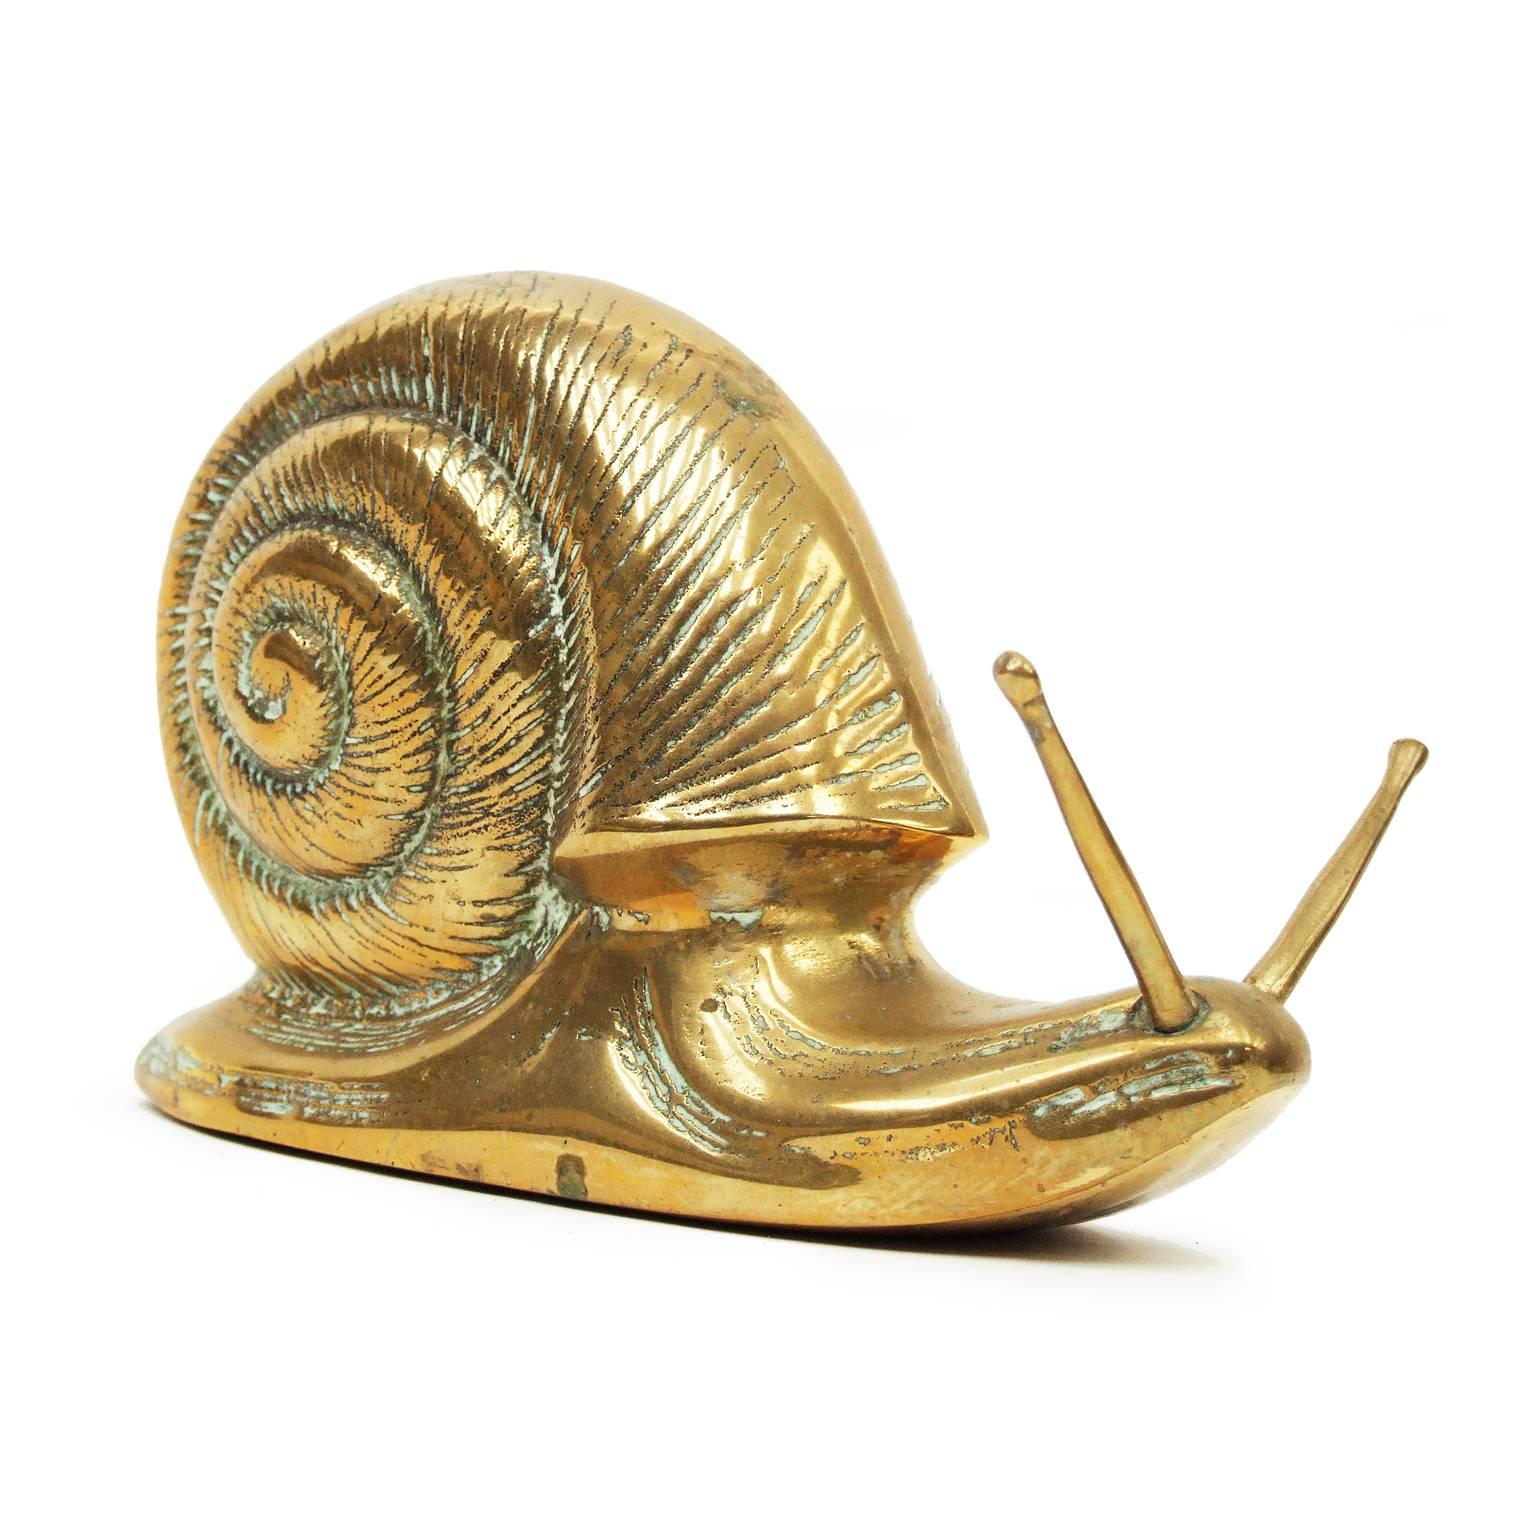 1950s large brass snail sculpture designed and manufactured in France.

Measures: H 12cm x L 20cm x W 10cm.